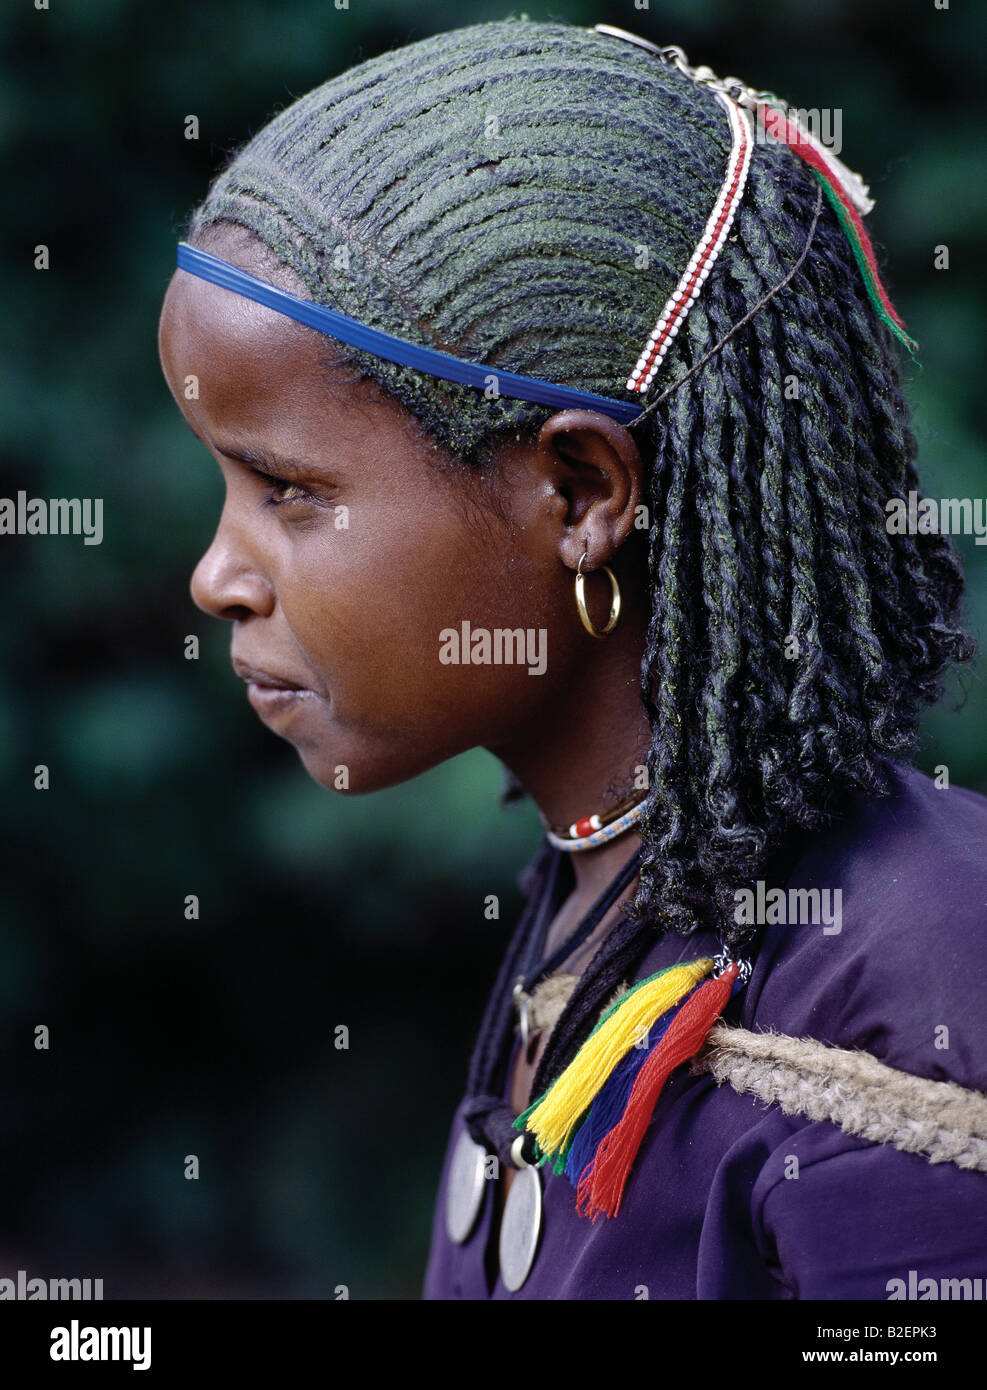 A young Ethiopian girl with unusual braided hair; the crown of her head has been smeared with a greenish substance. Stock Photo